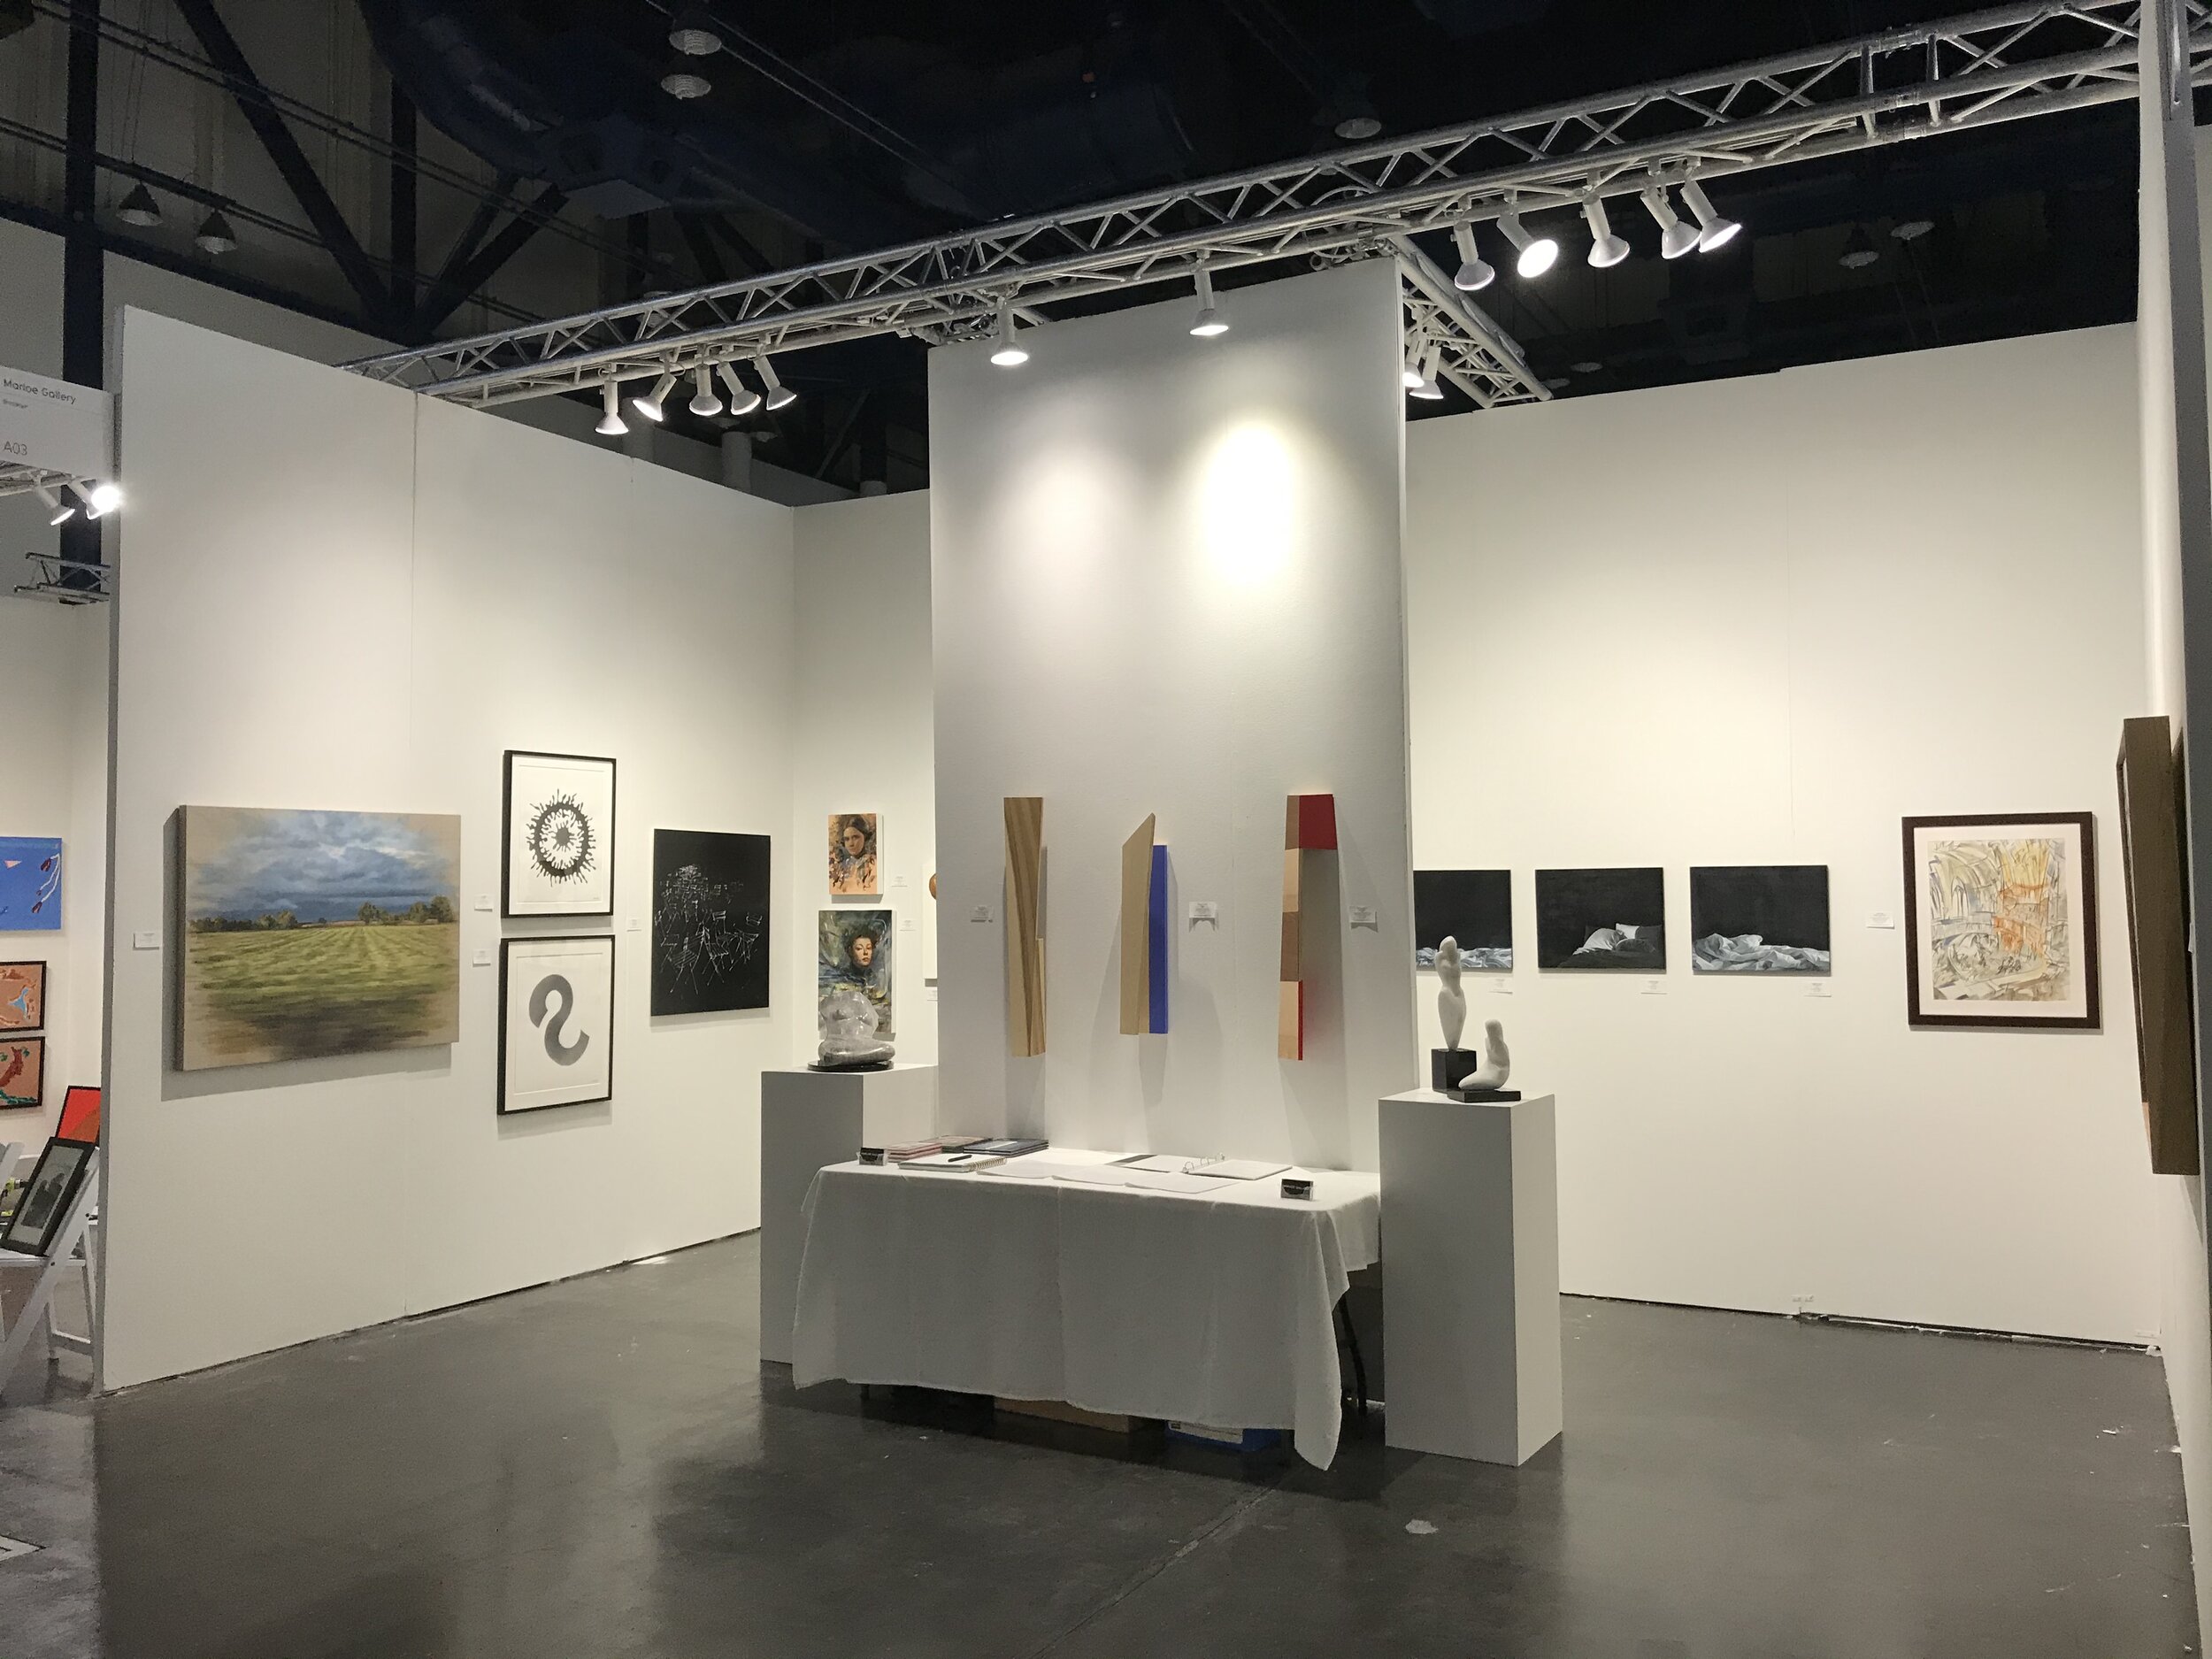 Texas Contemporary 2019 - Whole booth from left.JPG